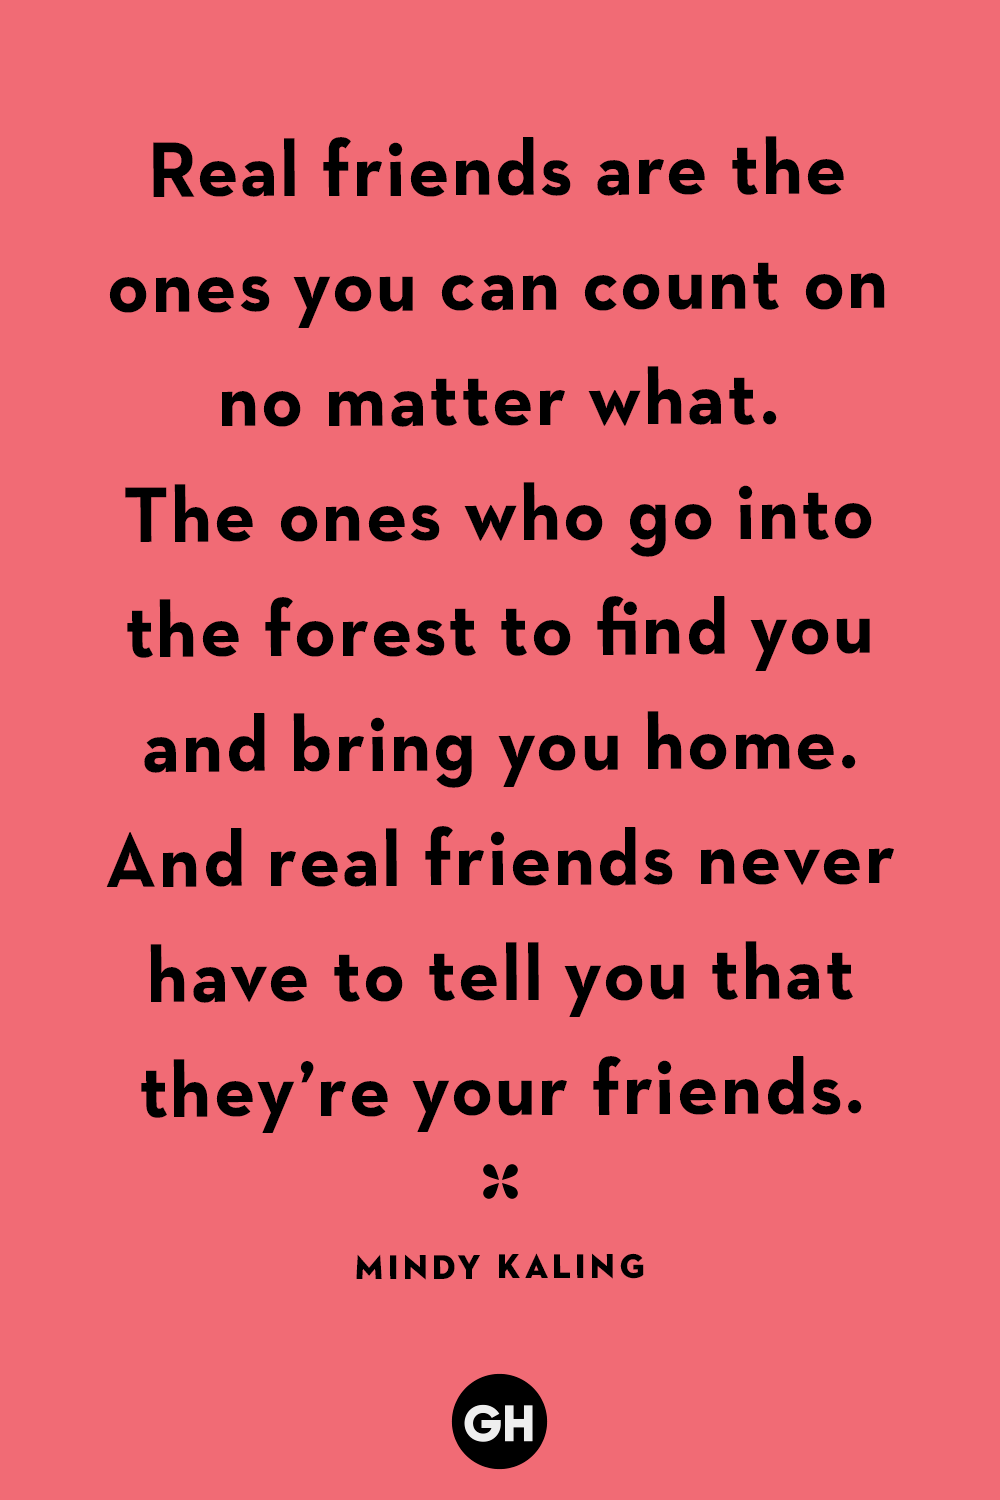 Friend Quotes And Sayings